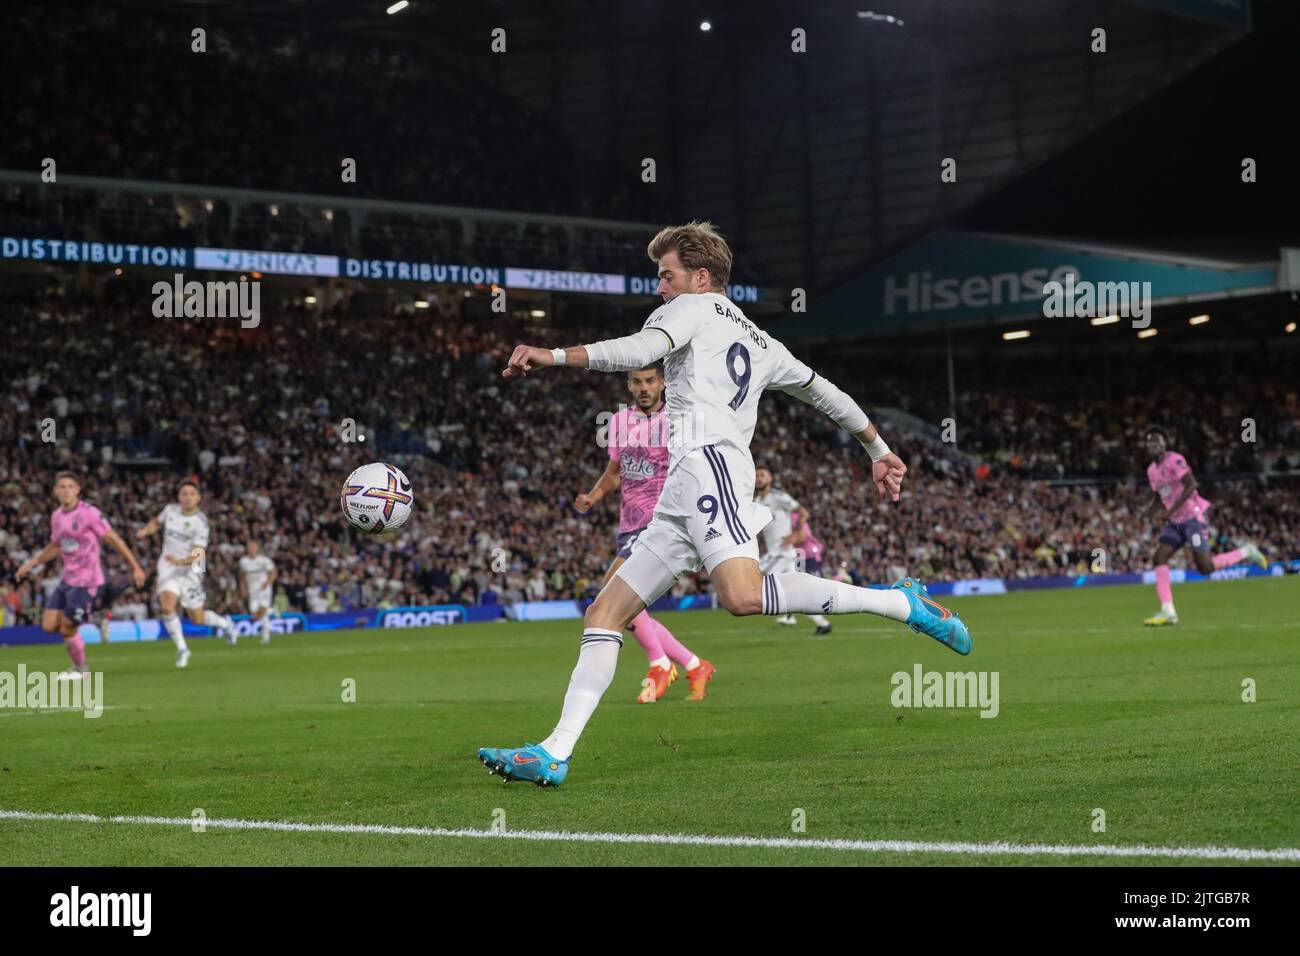 Patrick Bamford #9 of Leeds United crosses the ball during the Premier League match Leeds United vs Everton at Elland Road in Leeds, UK, 30th August 2022 Stock Photo